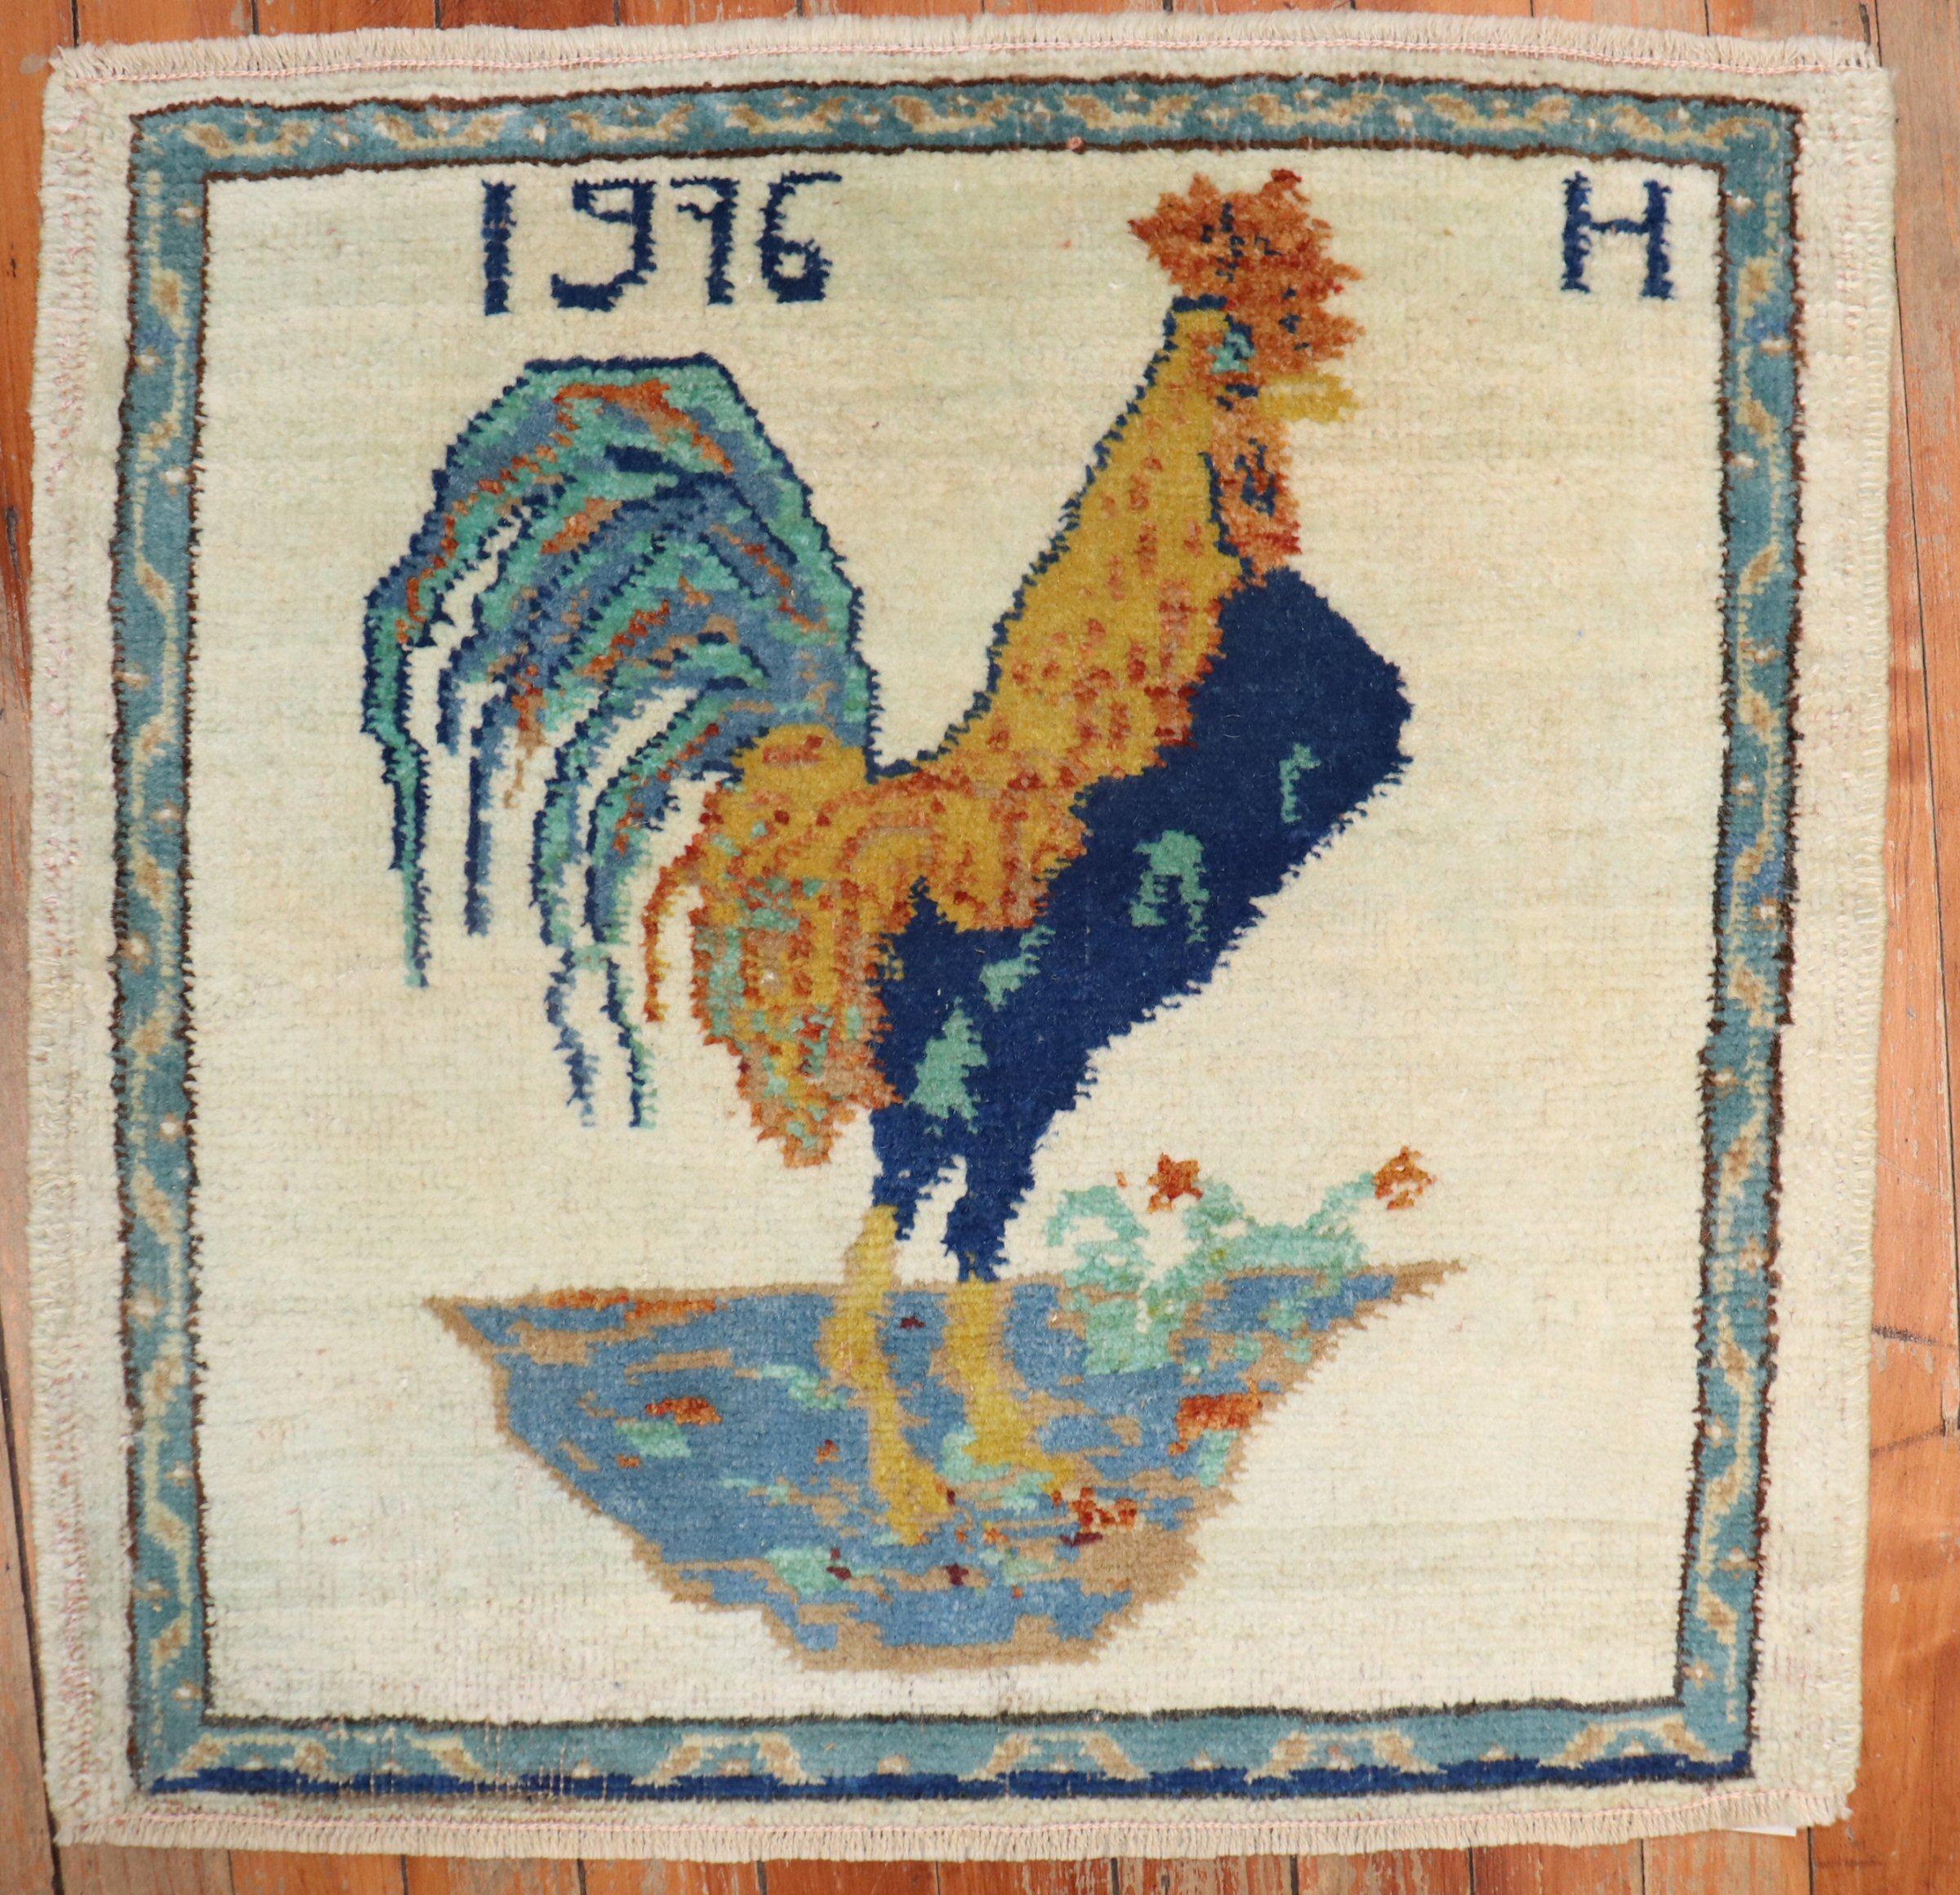 Vintage Turkishmat size rug depicting a rooster on an ivory field. Dated 1976

Measures: 1'10